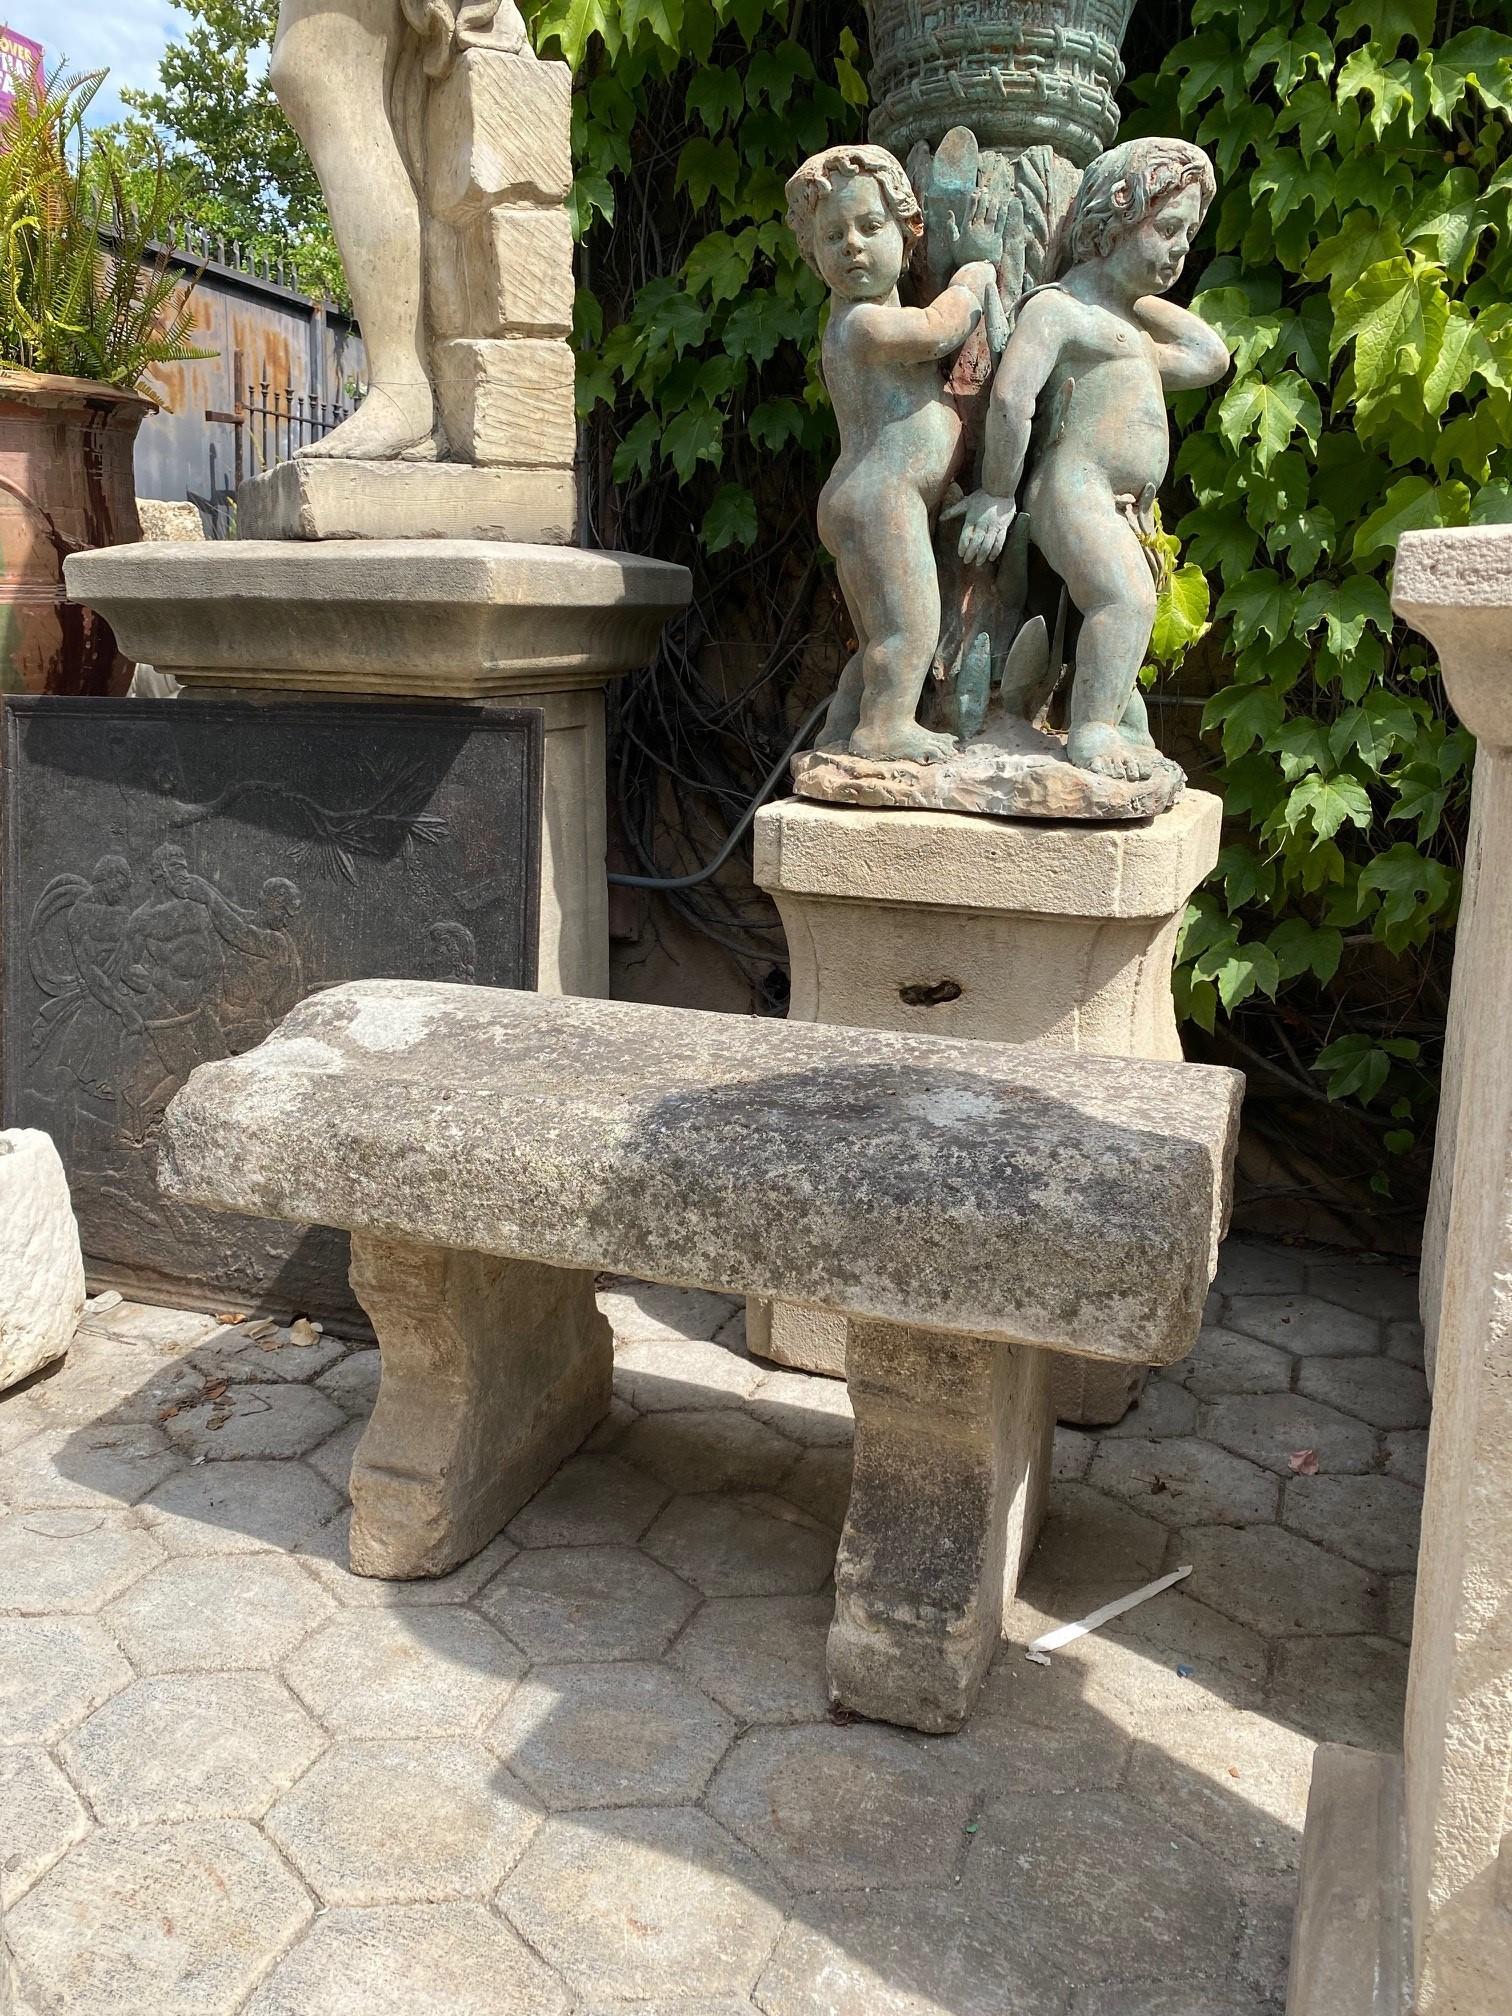 18th century hand carved stone bench. This rustic beauty is a rare piece indeed A beautiful garden bench simple lines that works in an interior as a seating or decorative architectural sculpted element. Mounted against a wall in a modern context